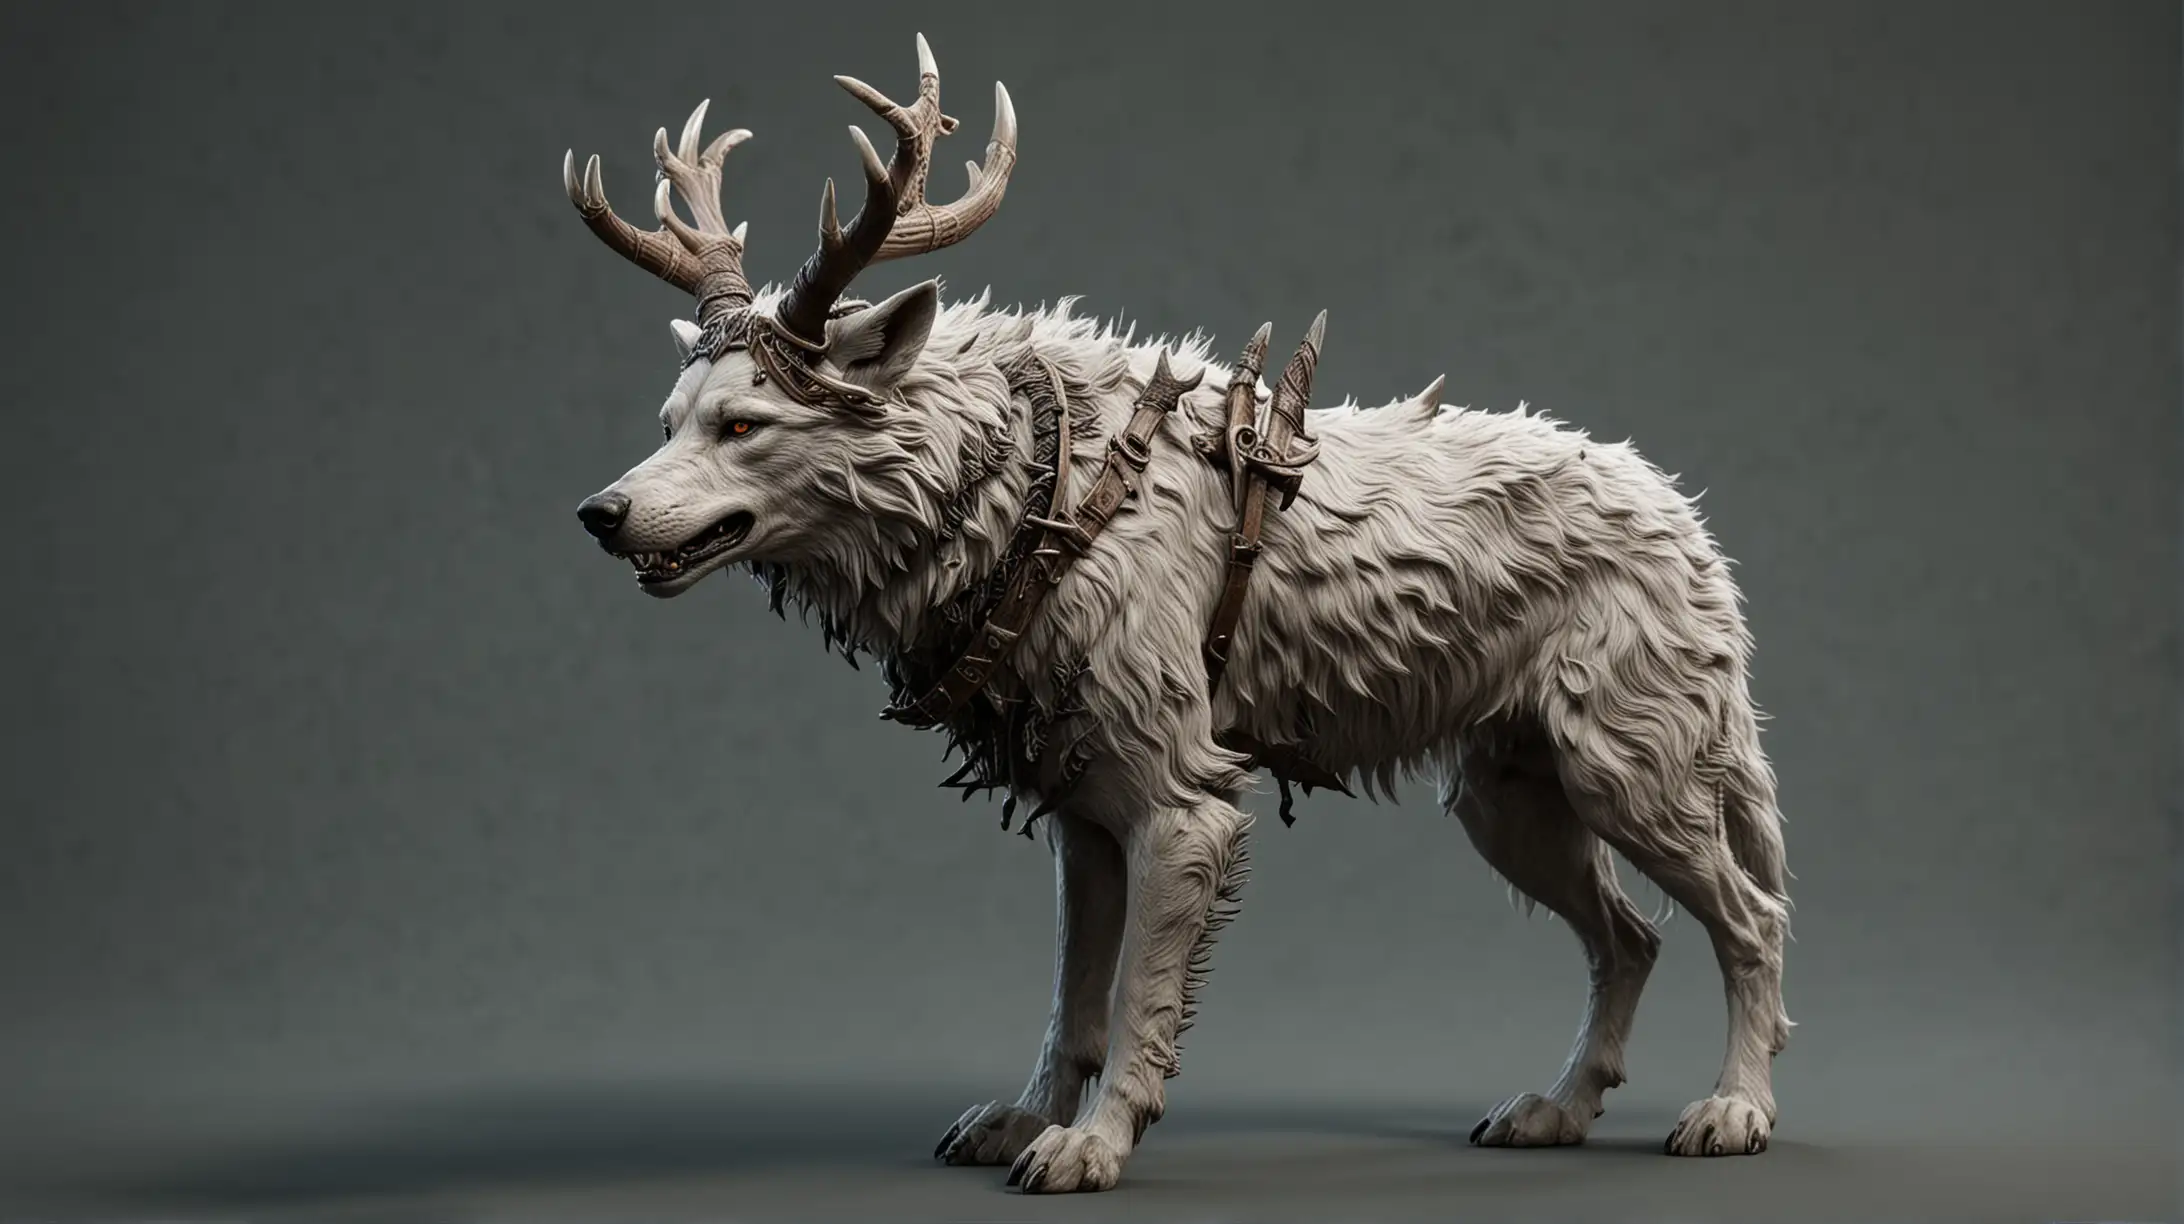 Majestic High Fantasy Direwolf with Antlers